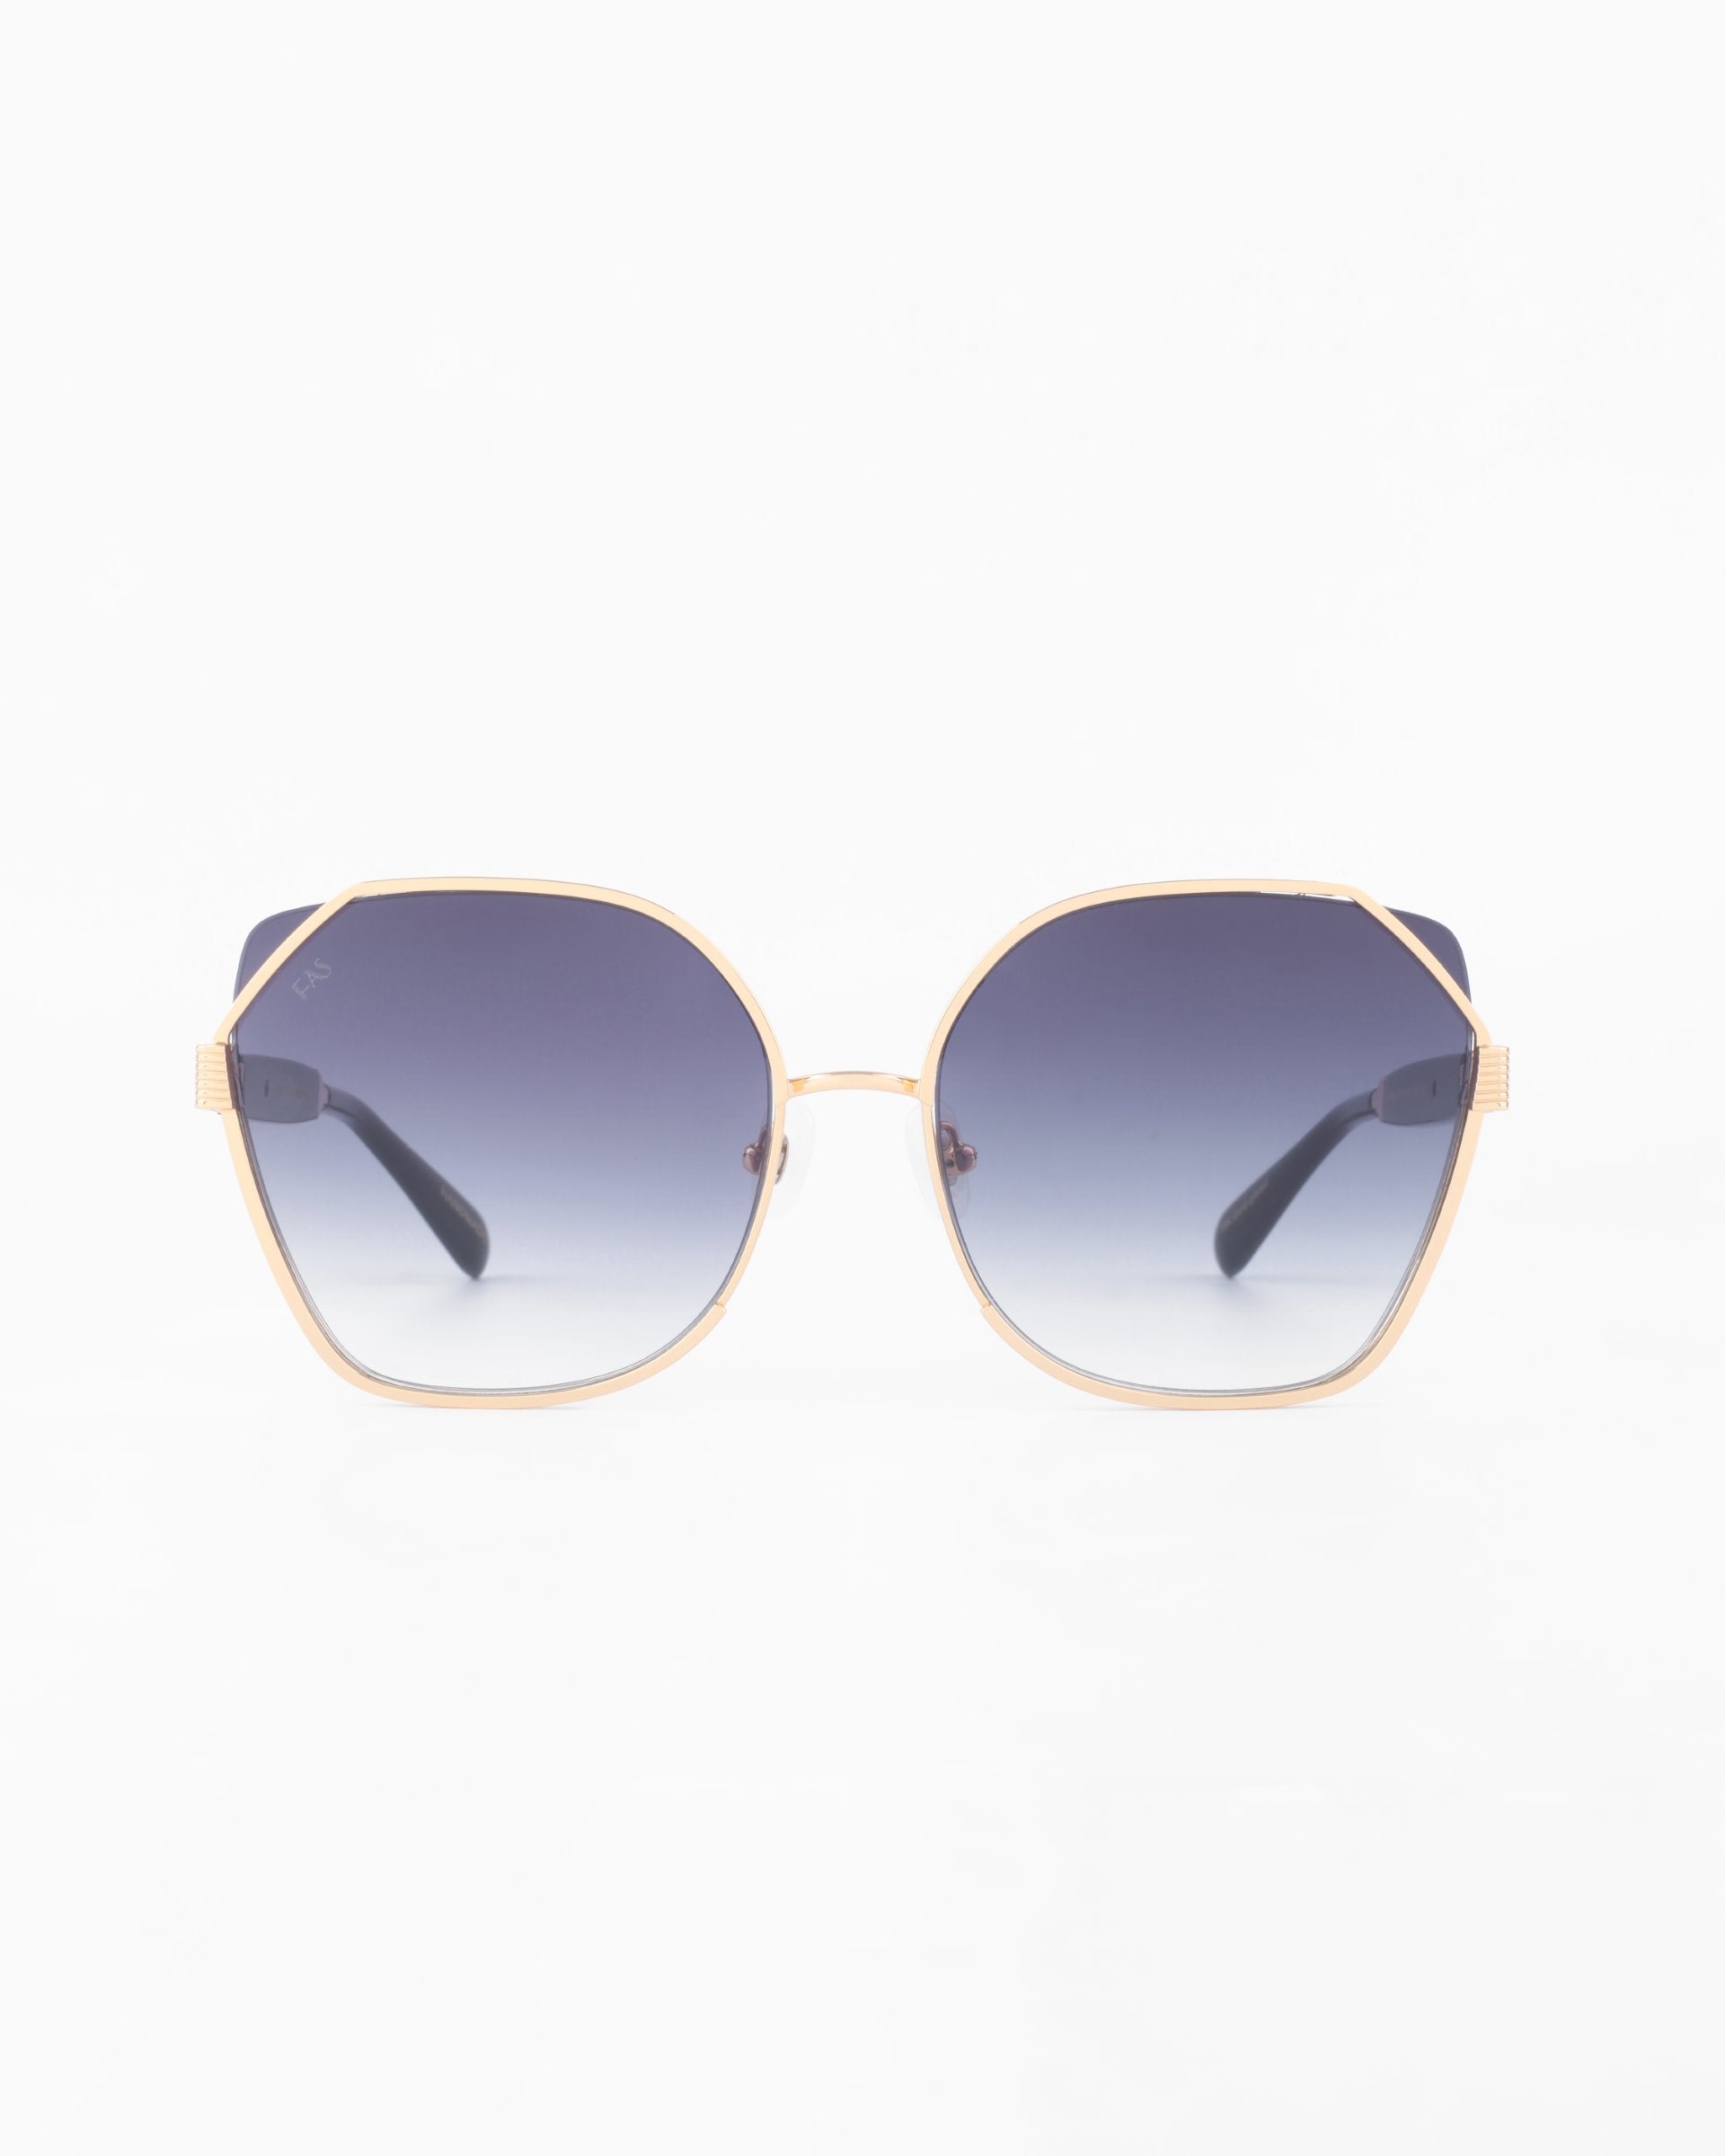 A pair of stylish For Art's Sake® Montage sunglasses with gold-plated stainless steel hexagonal frames and gradient ultra-lightweight Nylon lenses that transition from dark at the top to lighter at the bottom. The temples are black, and the overall design is sleek and modern against a plain white background.